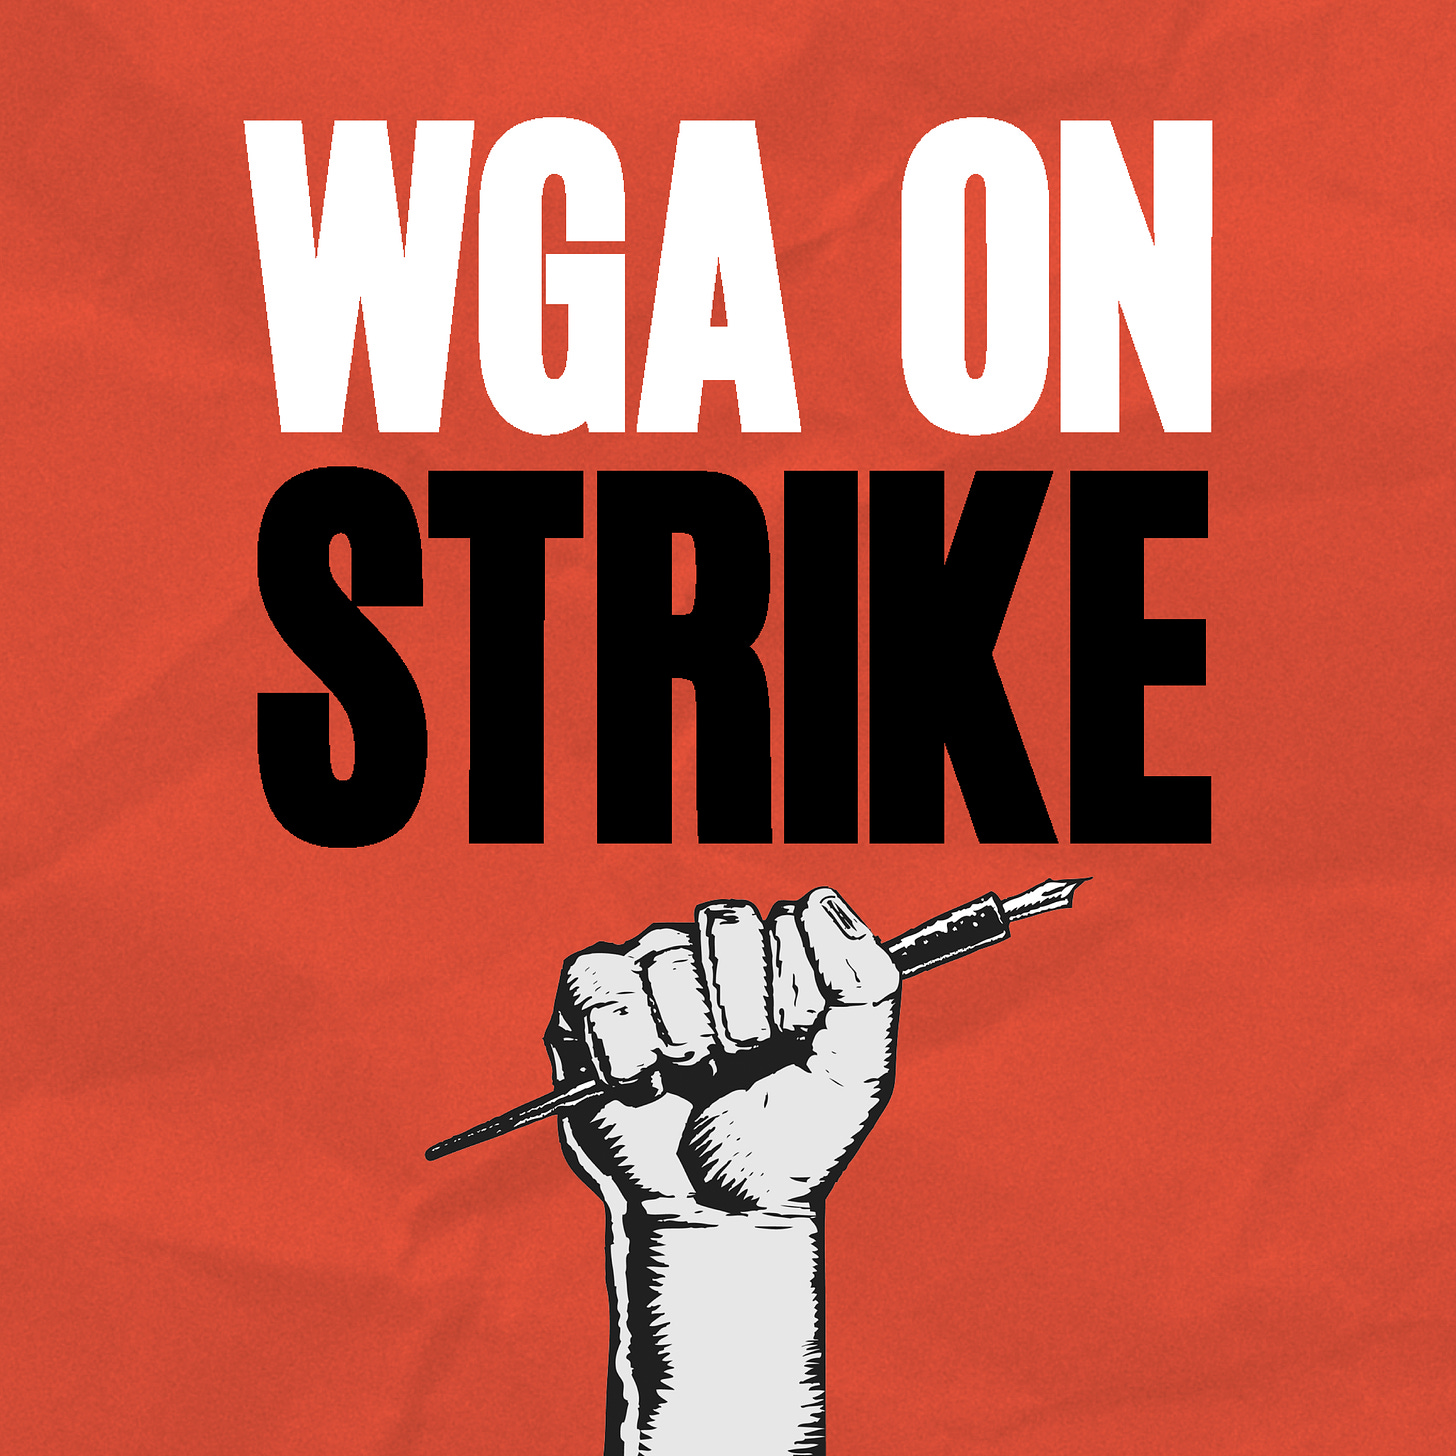 The WGA strike is an opportunity for journalists to show solidarity